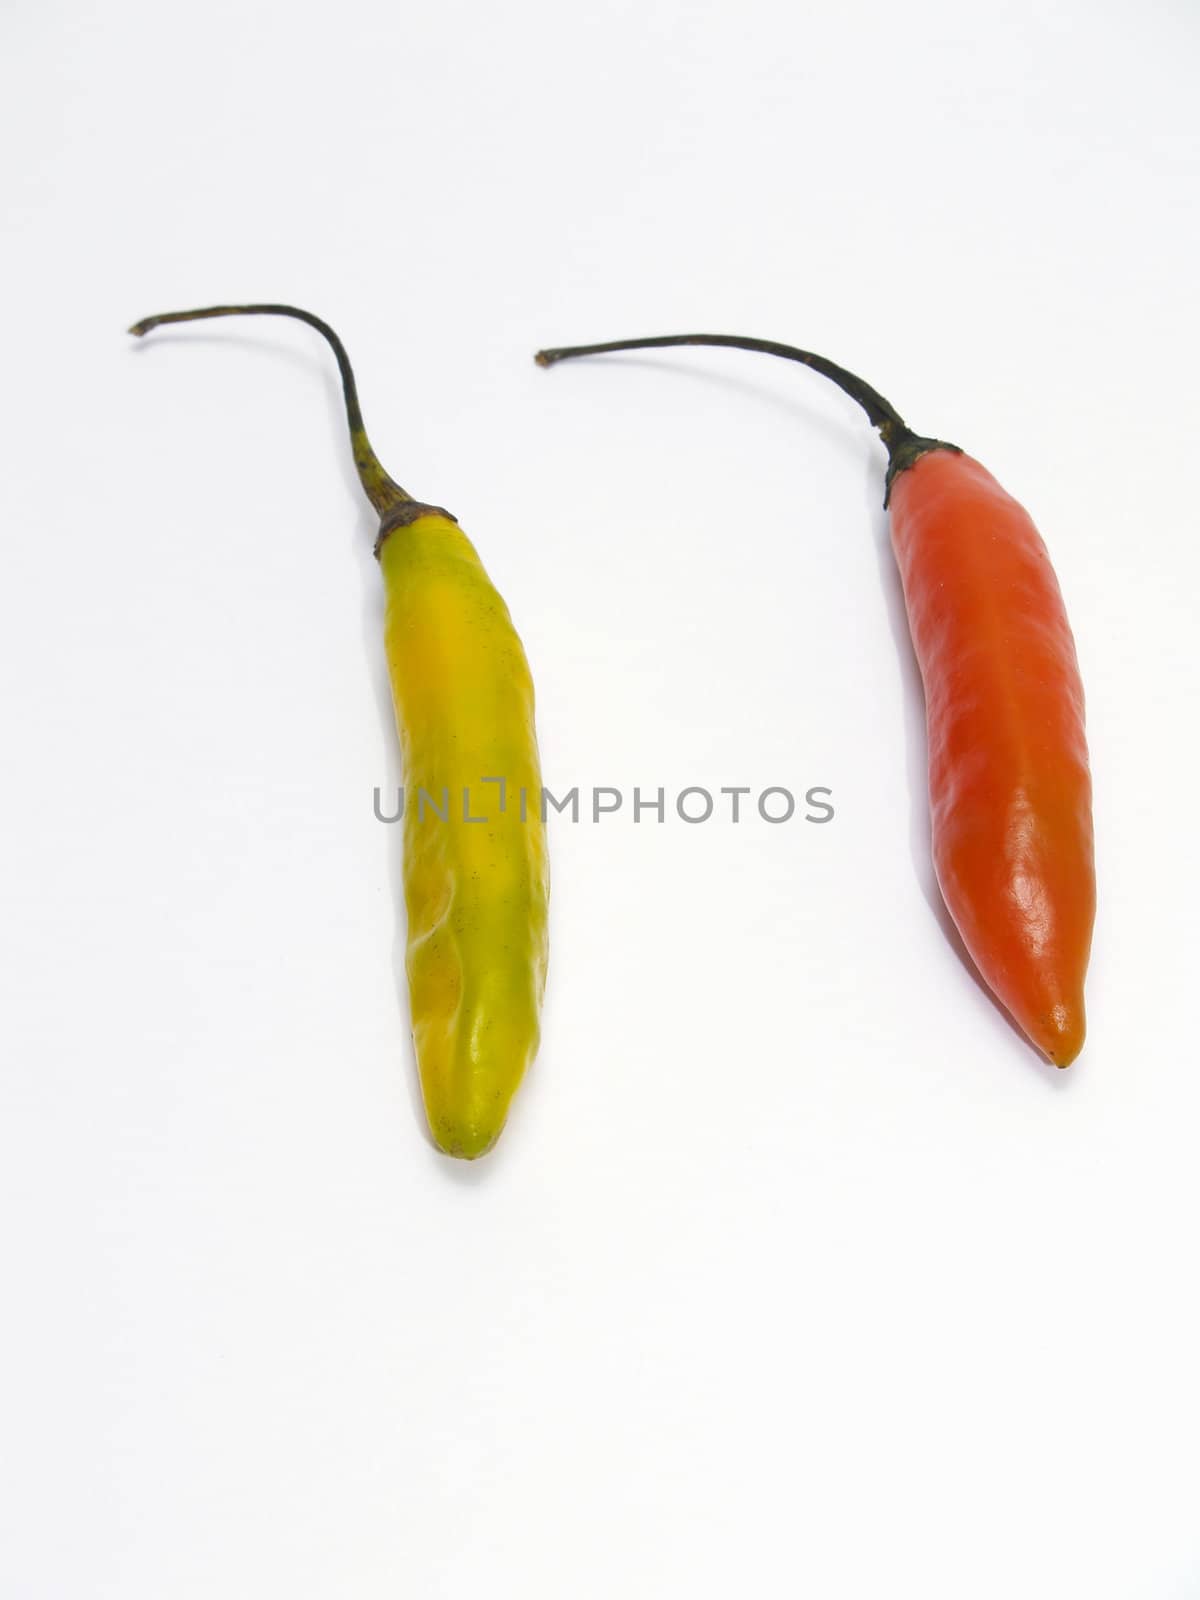 Peppers      by lauria